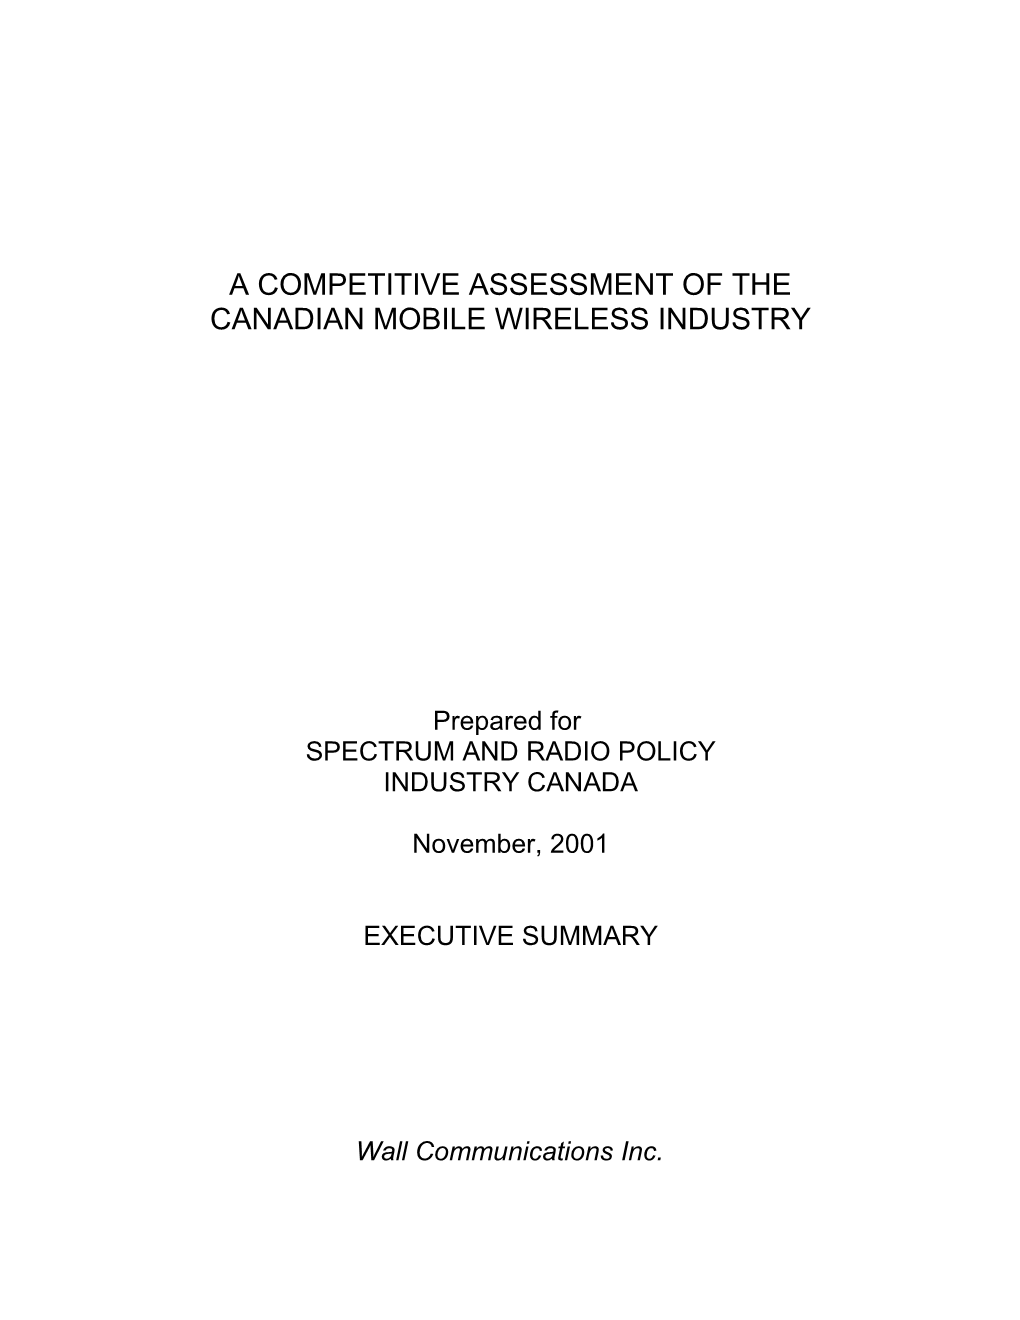 A Competitive Assessment of the Canadian Mobile Wireless Industry